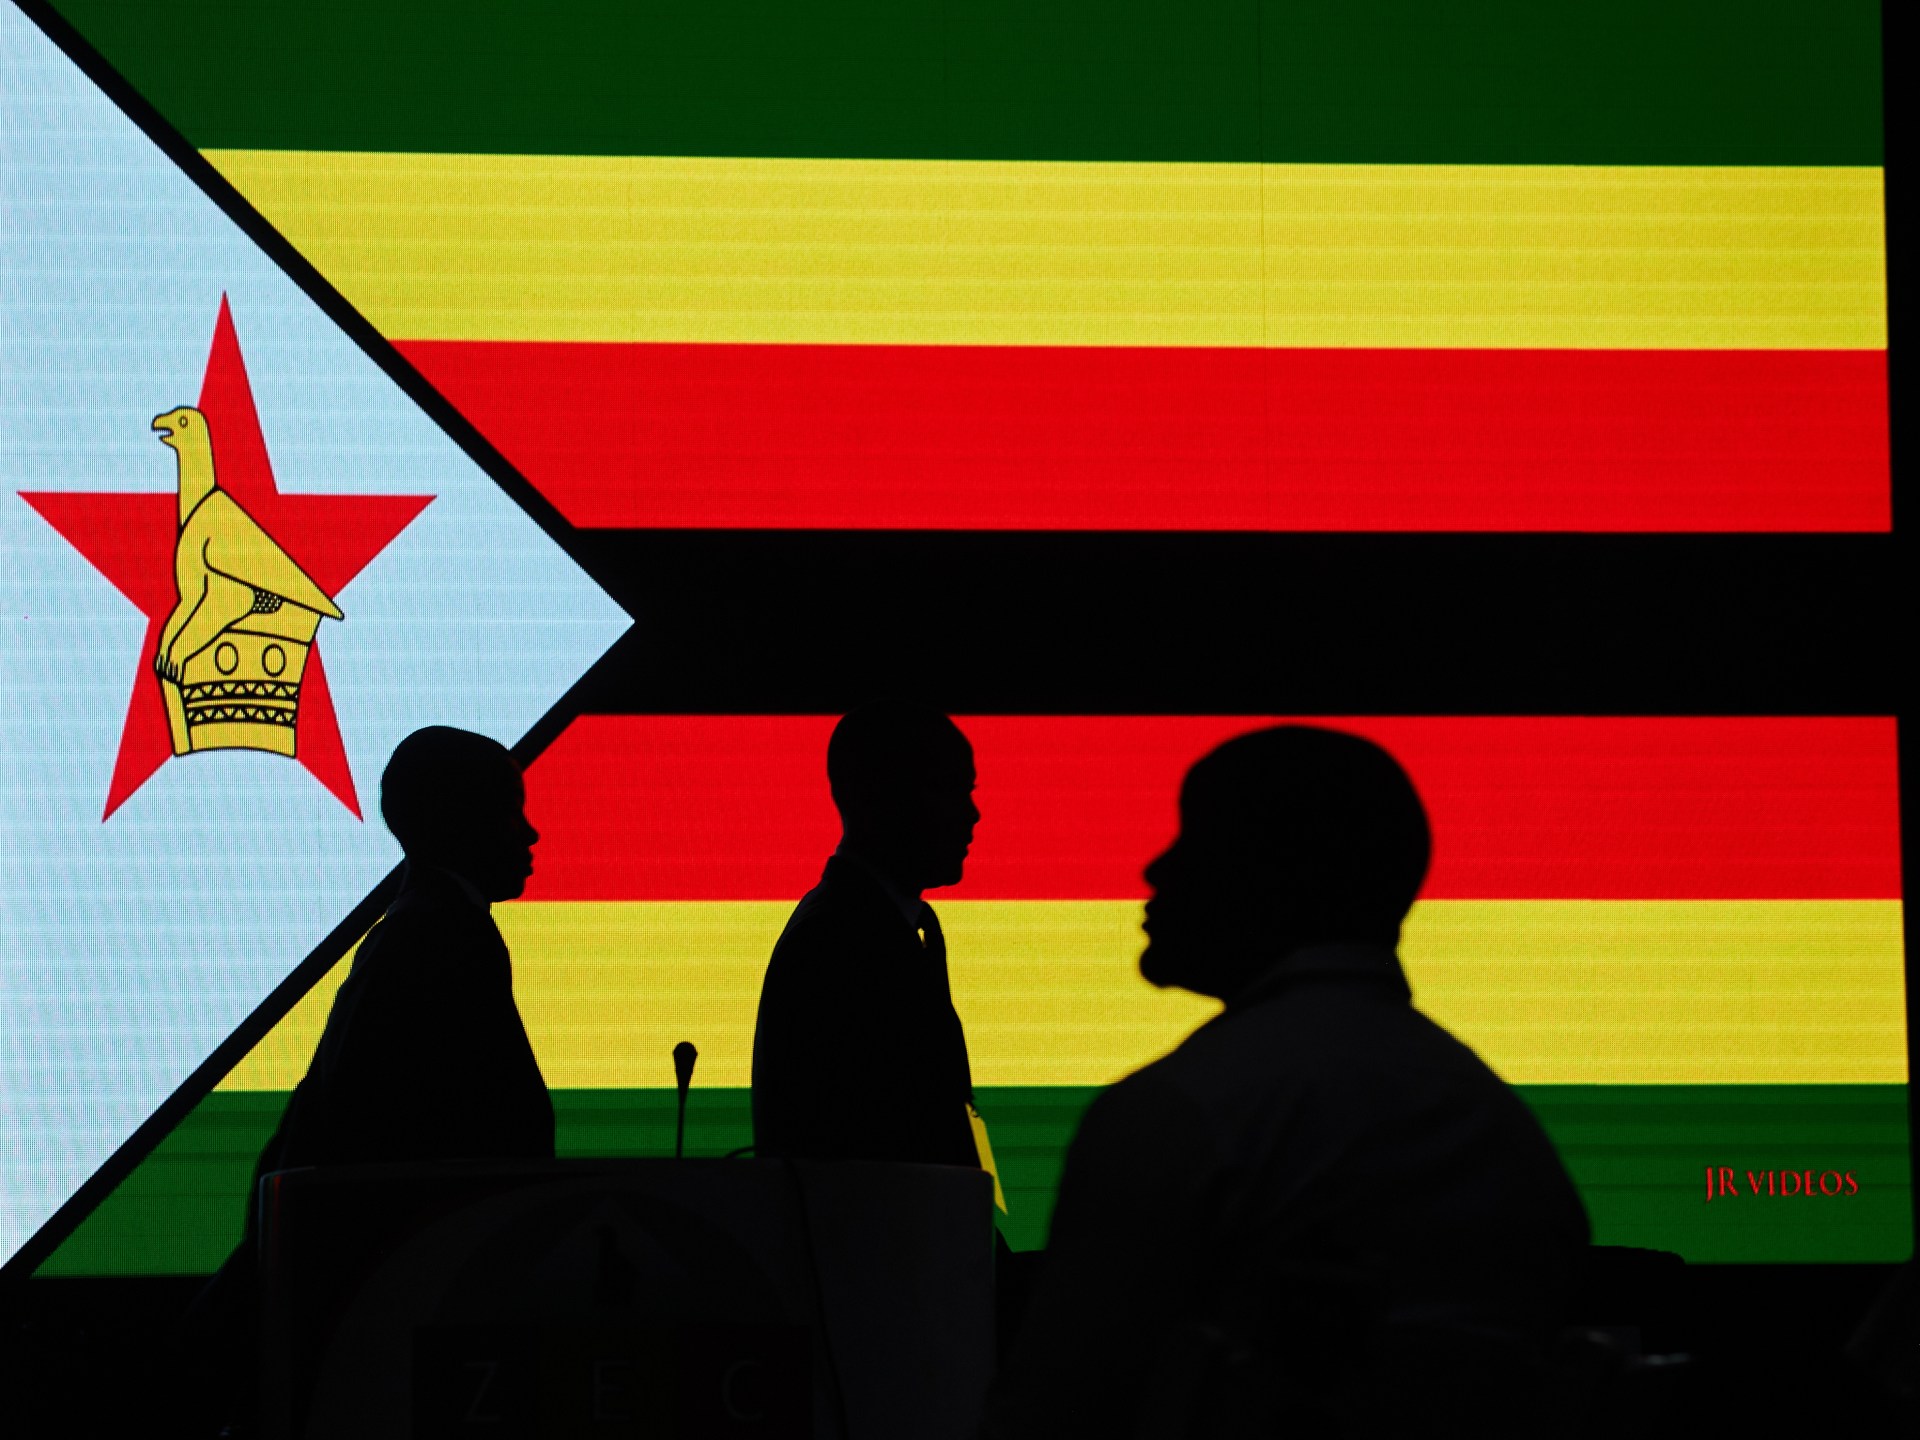 ‘Choiceless elections’: Zimbabweans cry foul before bizarre by-elections | Elections #Choiceless #elections #Zimbabweans #cry #foul #bizarre #byelections #Elections